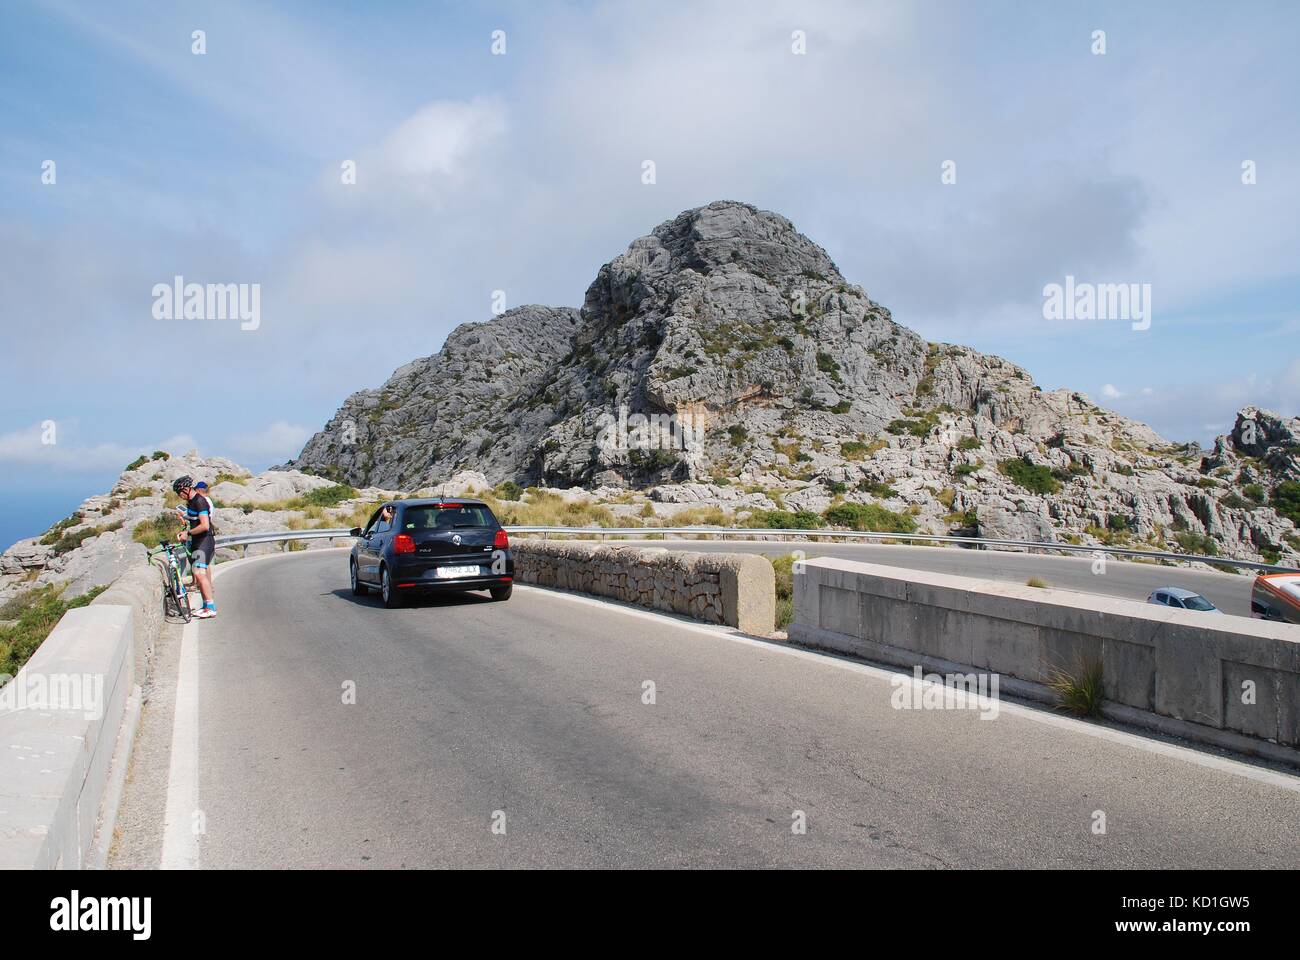 Cyclists and cars on the twisting road to Sa Calobra high up in the Tramuntana mountains on the Spanish island of Majorca on September 6, 2017. Stock Photo